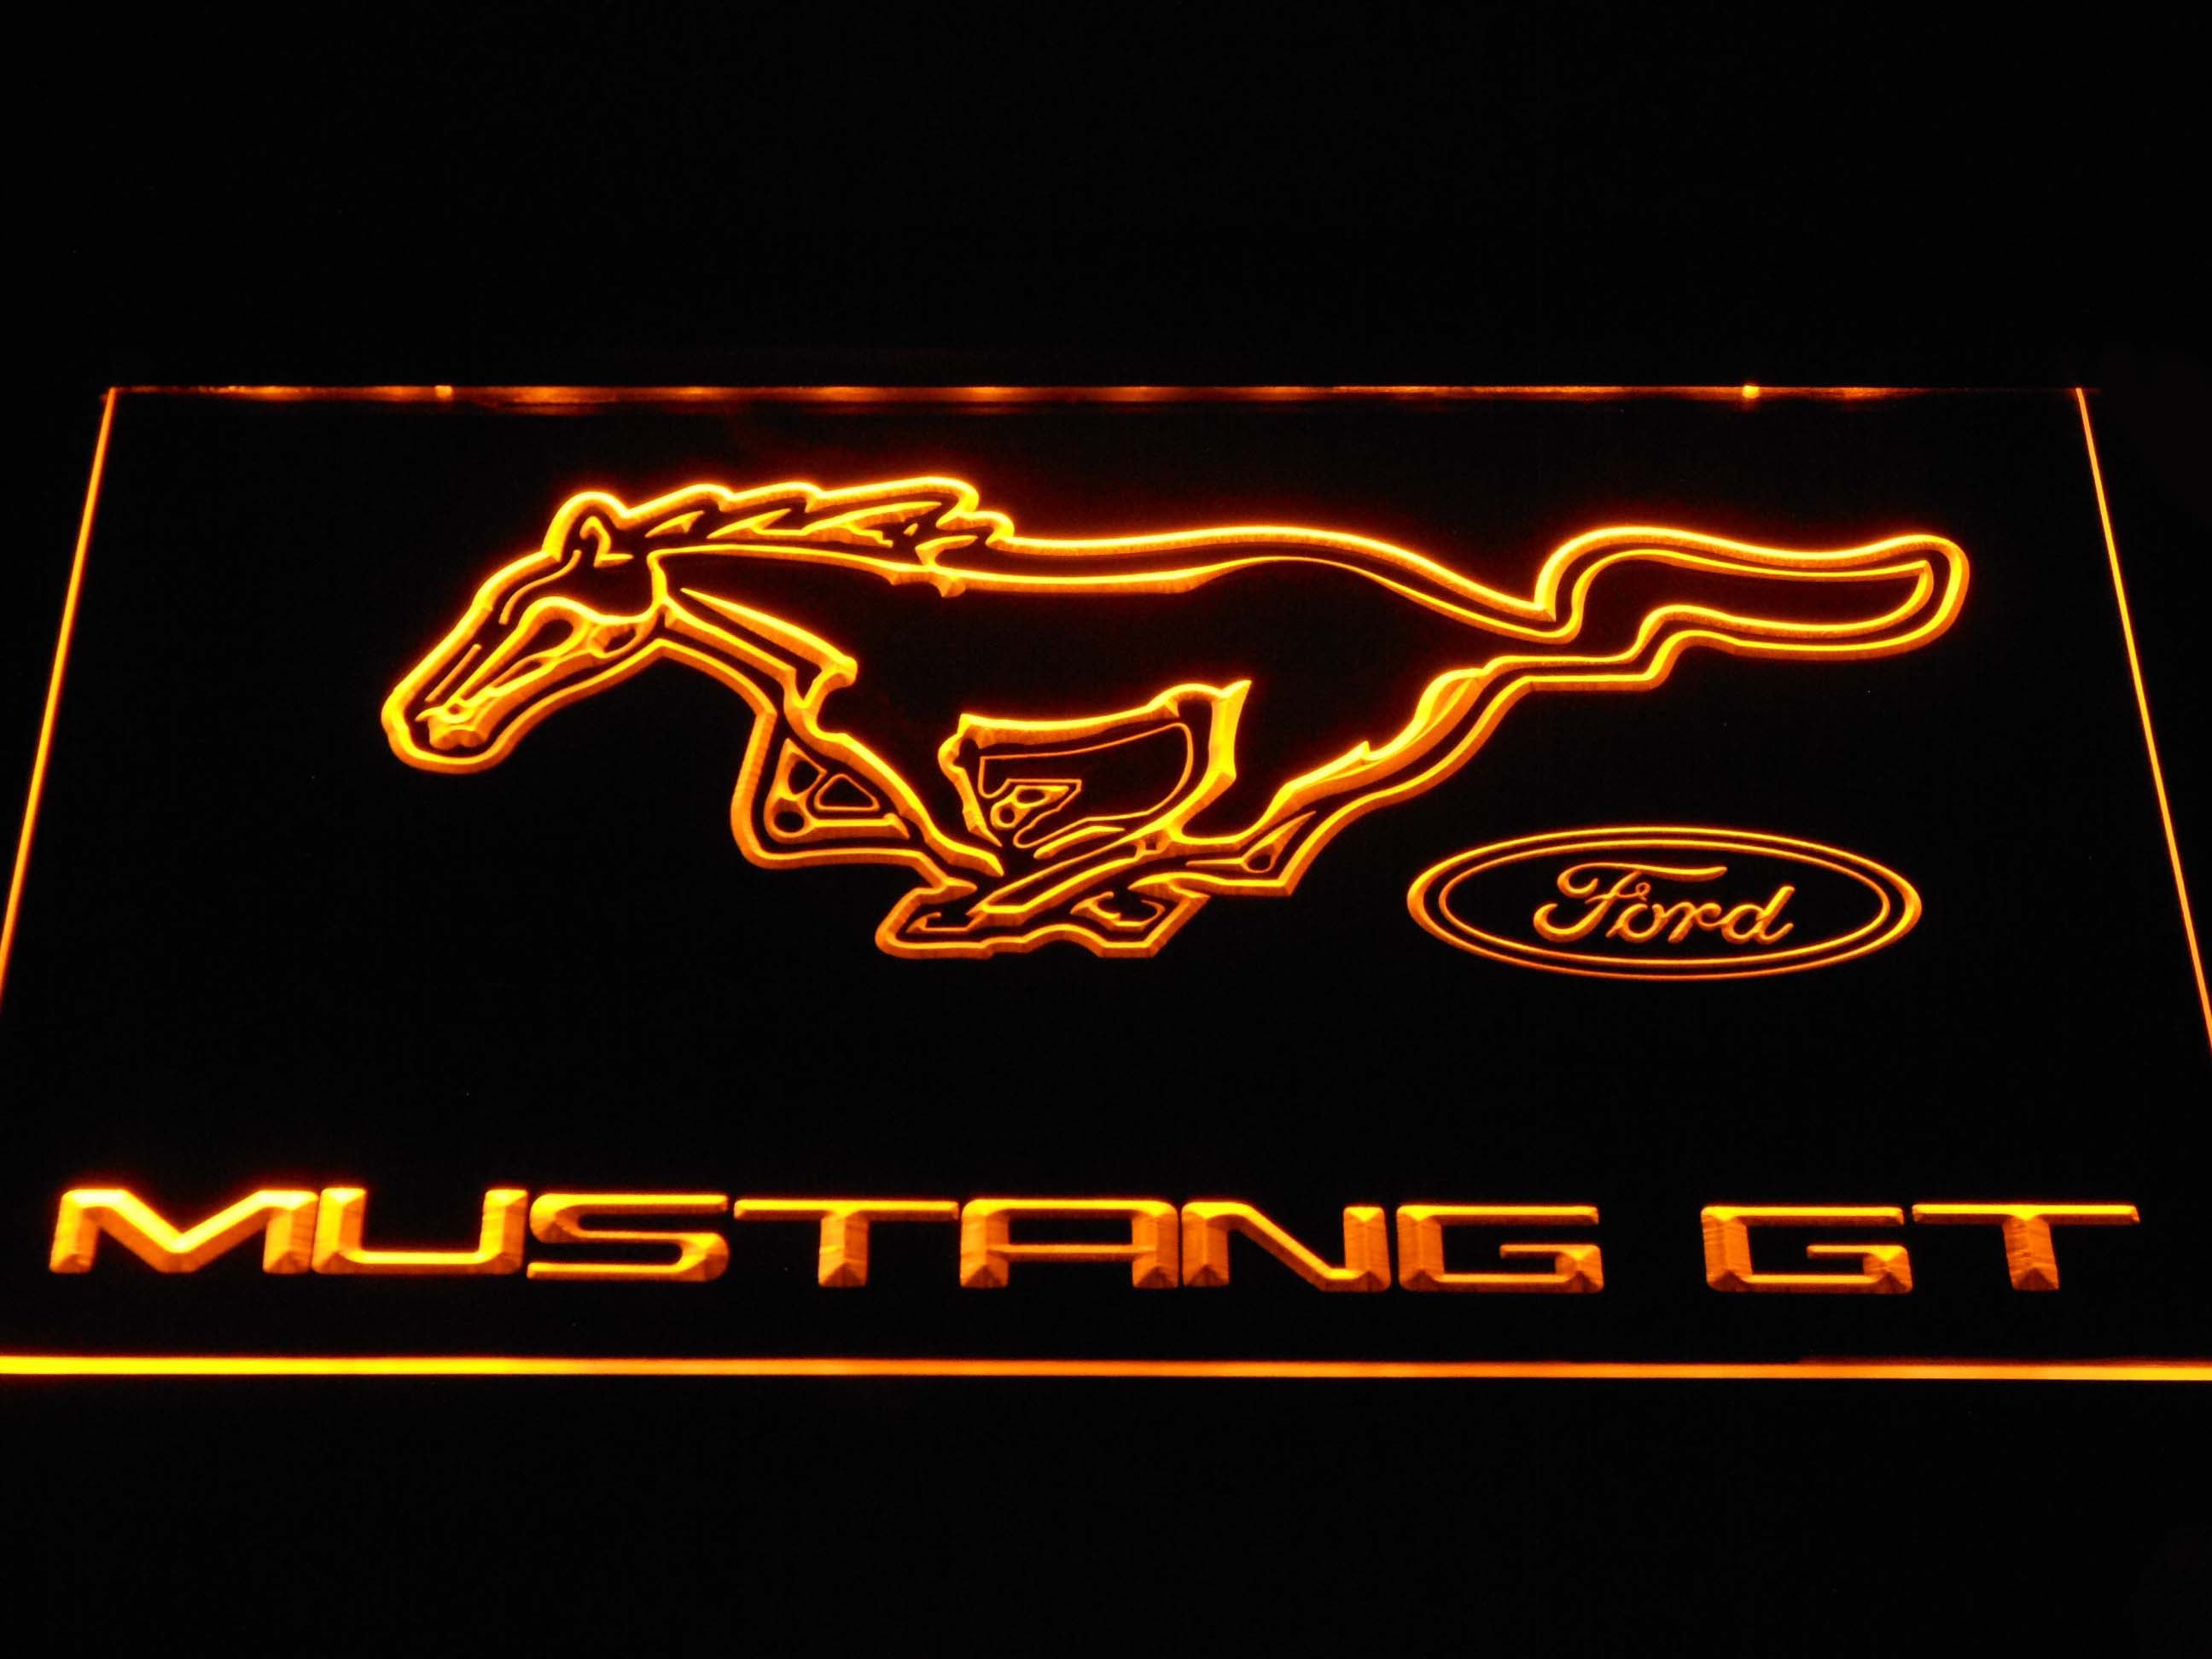 Fords Mustangs GT Neon LED Light Sign